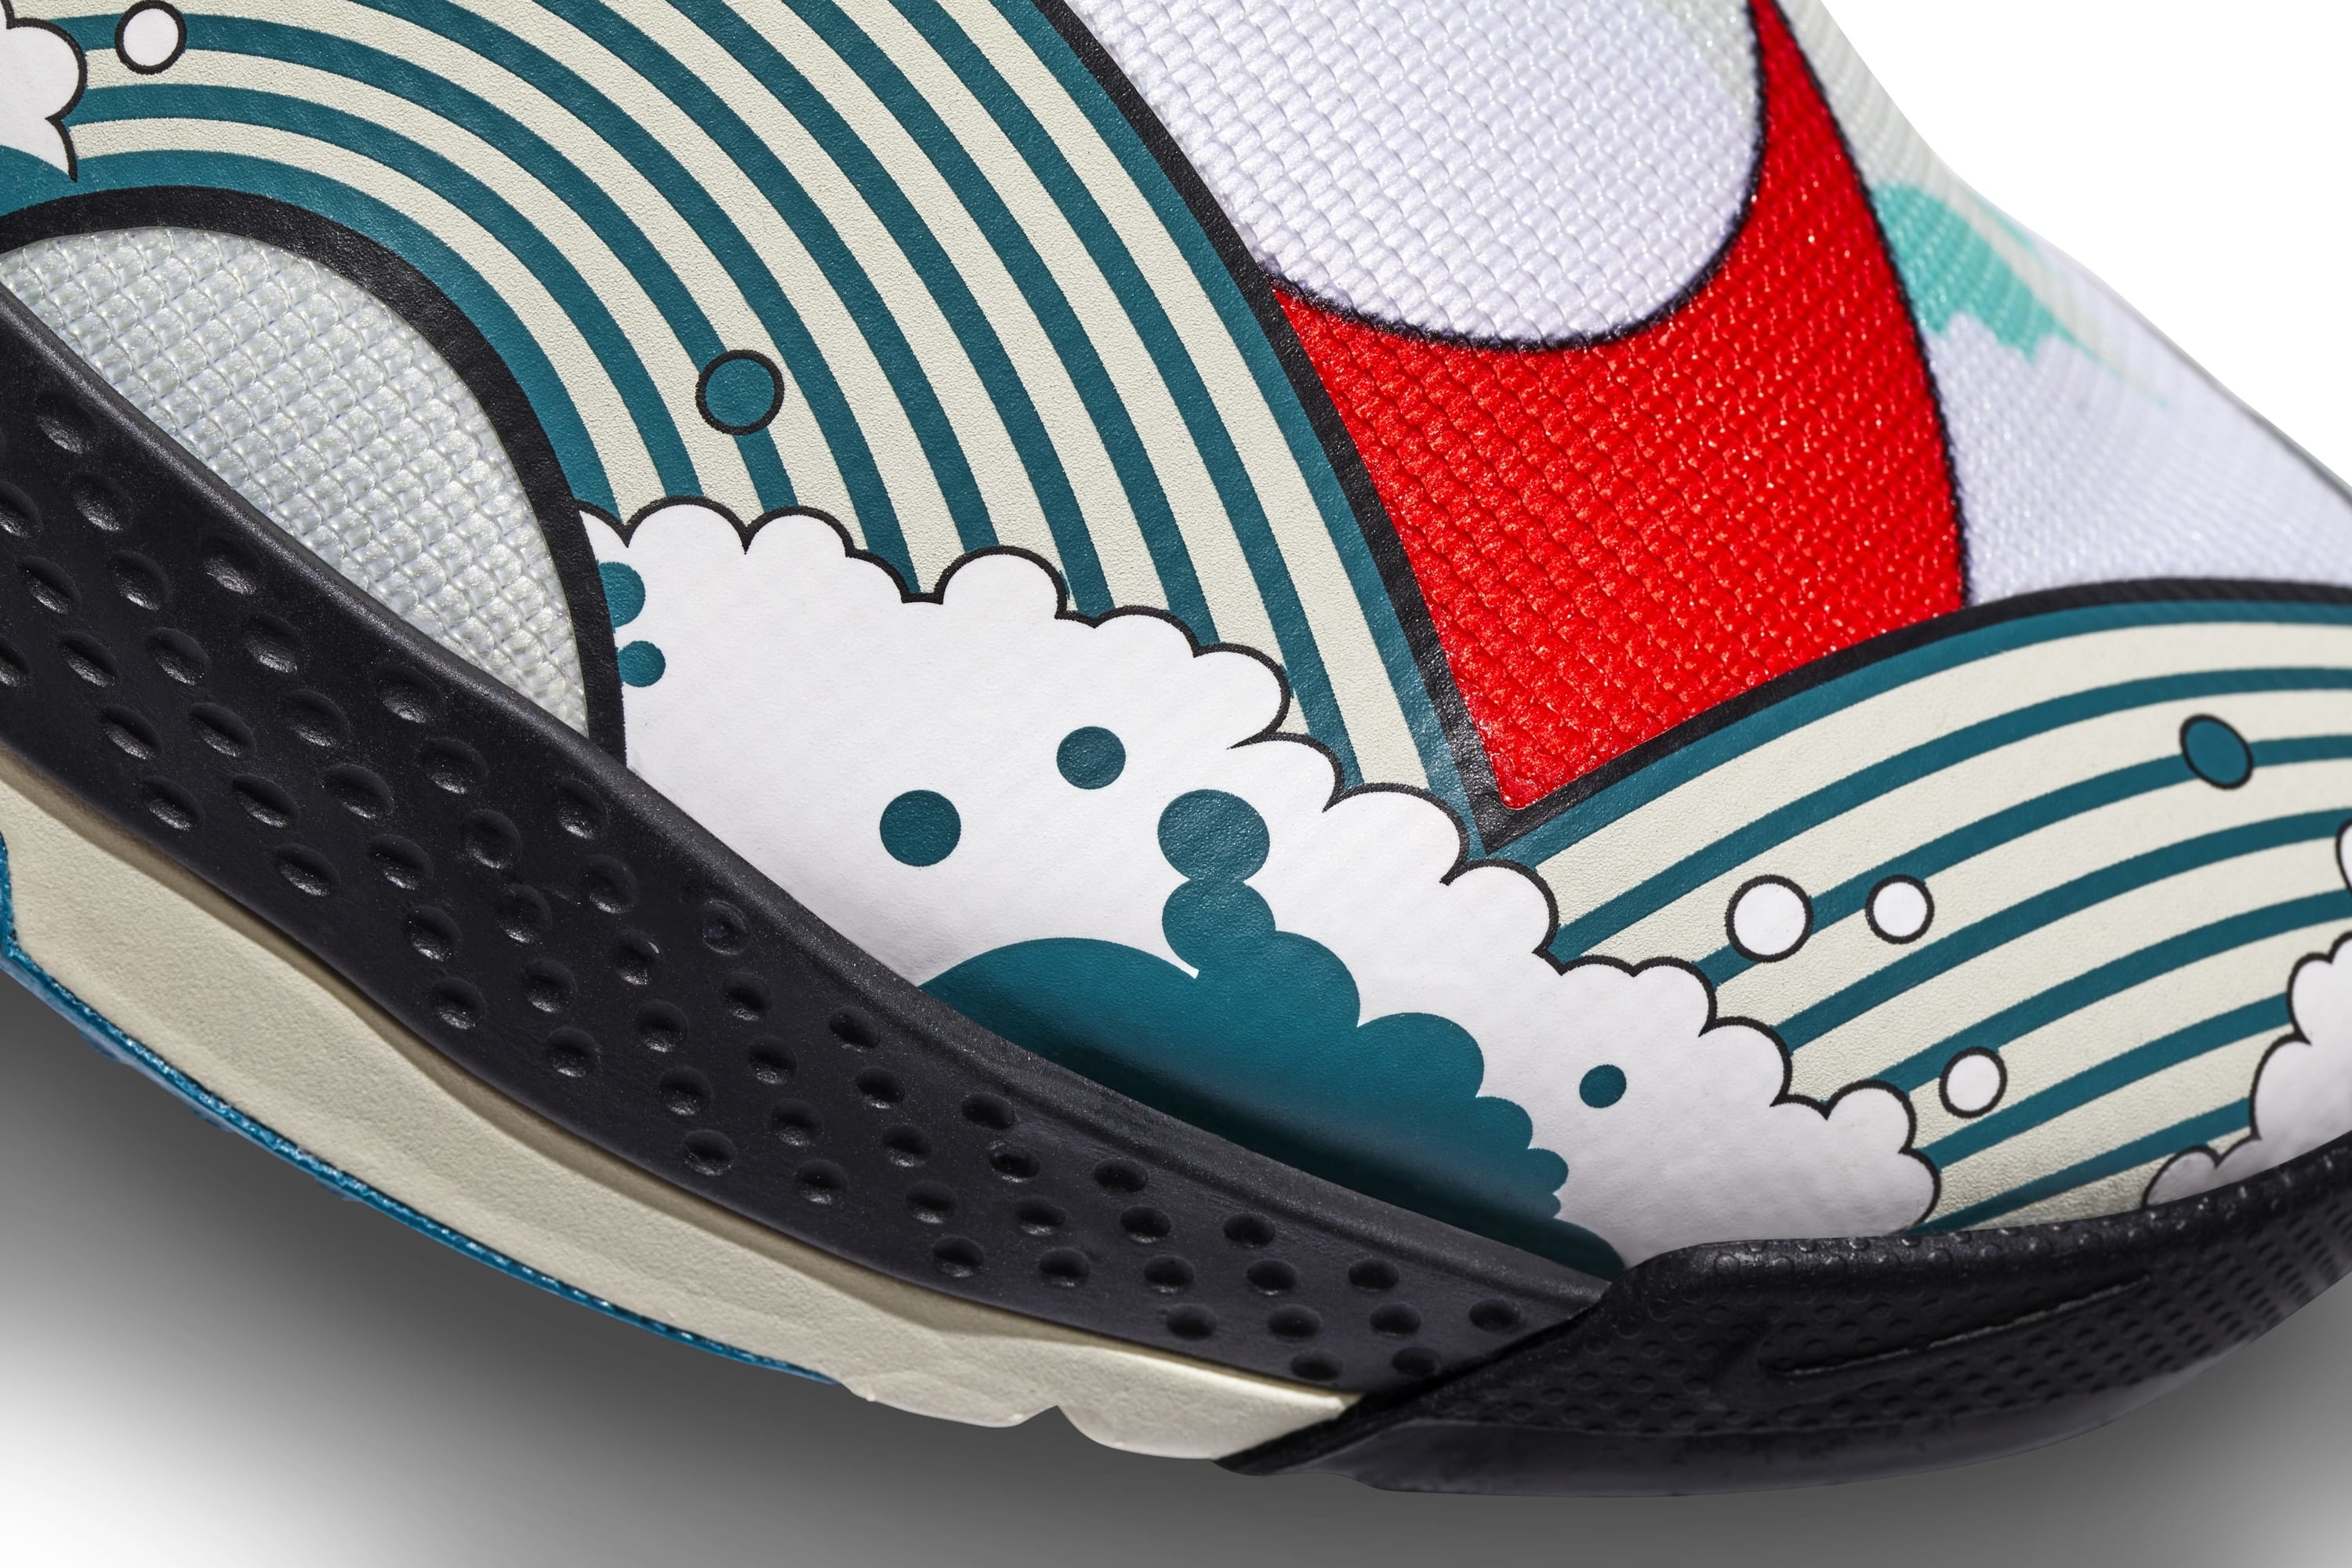 Nike FlyEase Go by Christopher Musquiz Jr. Detail 1